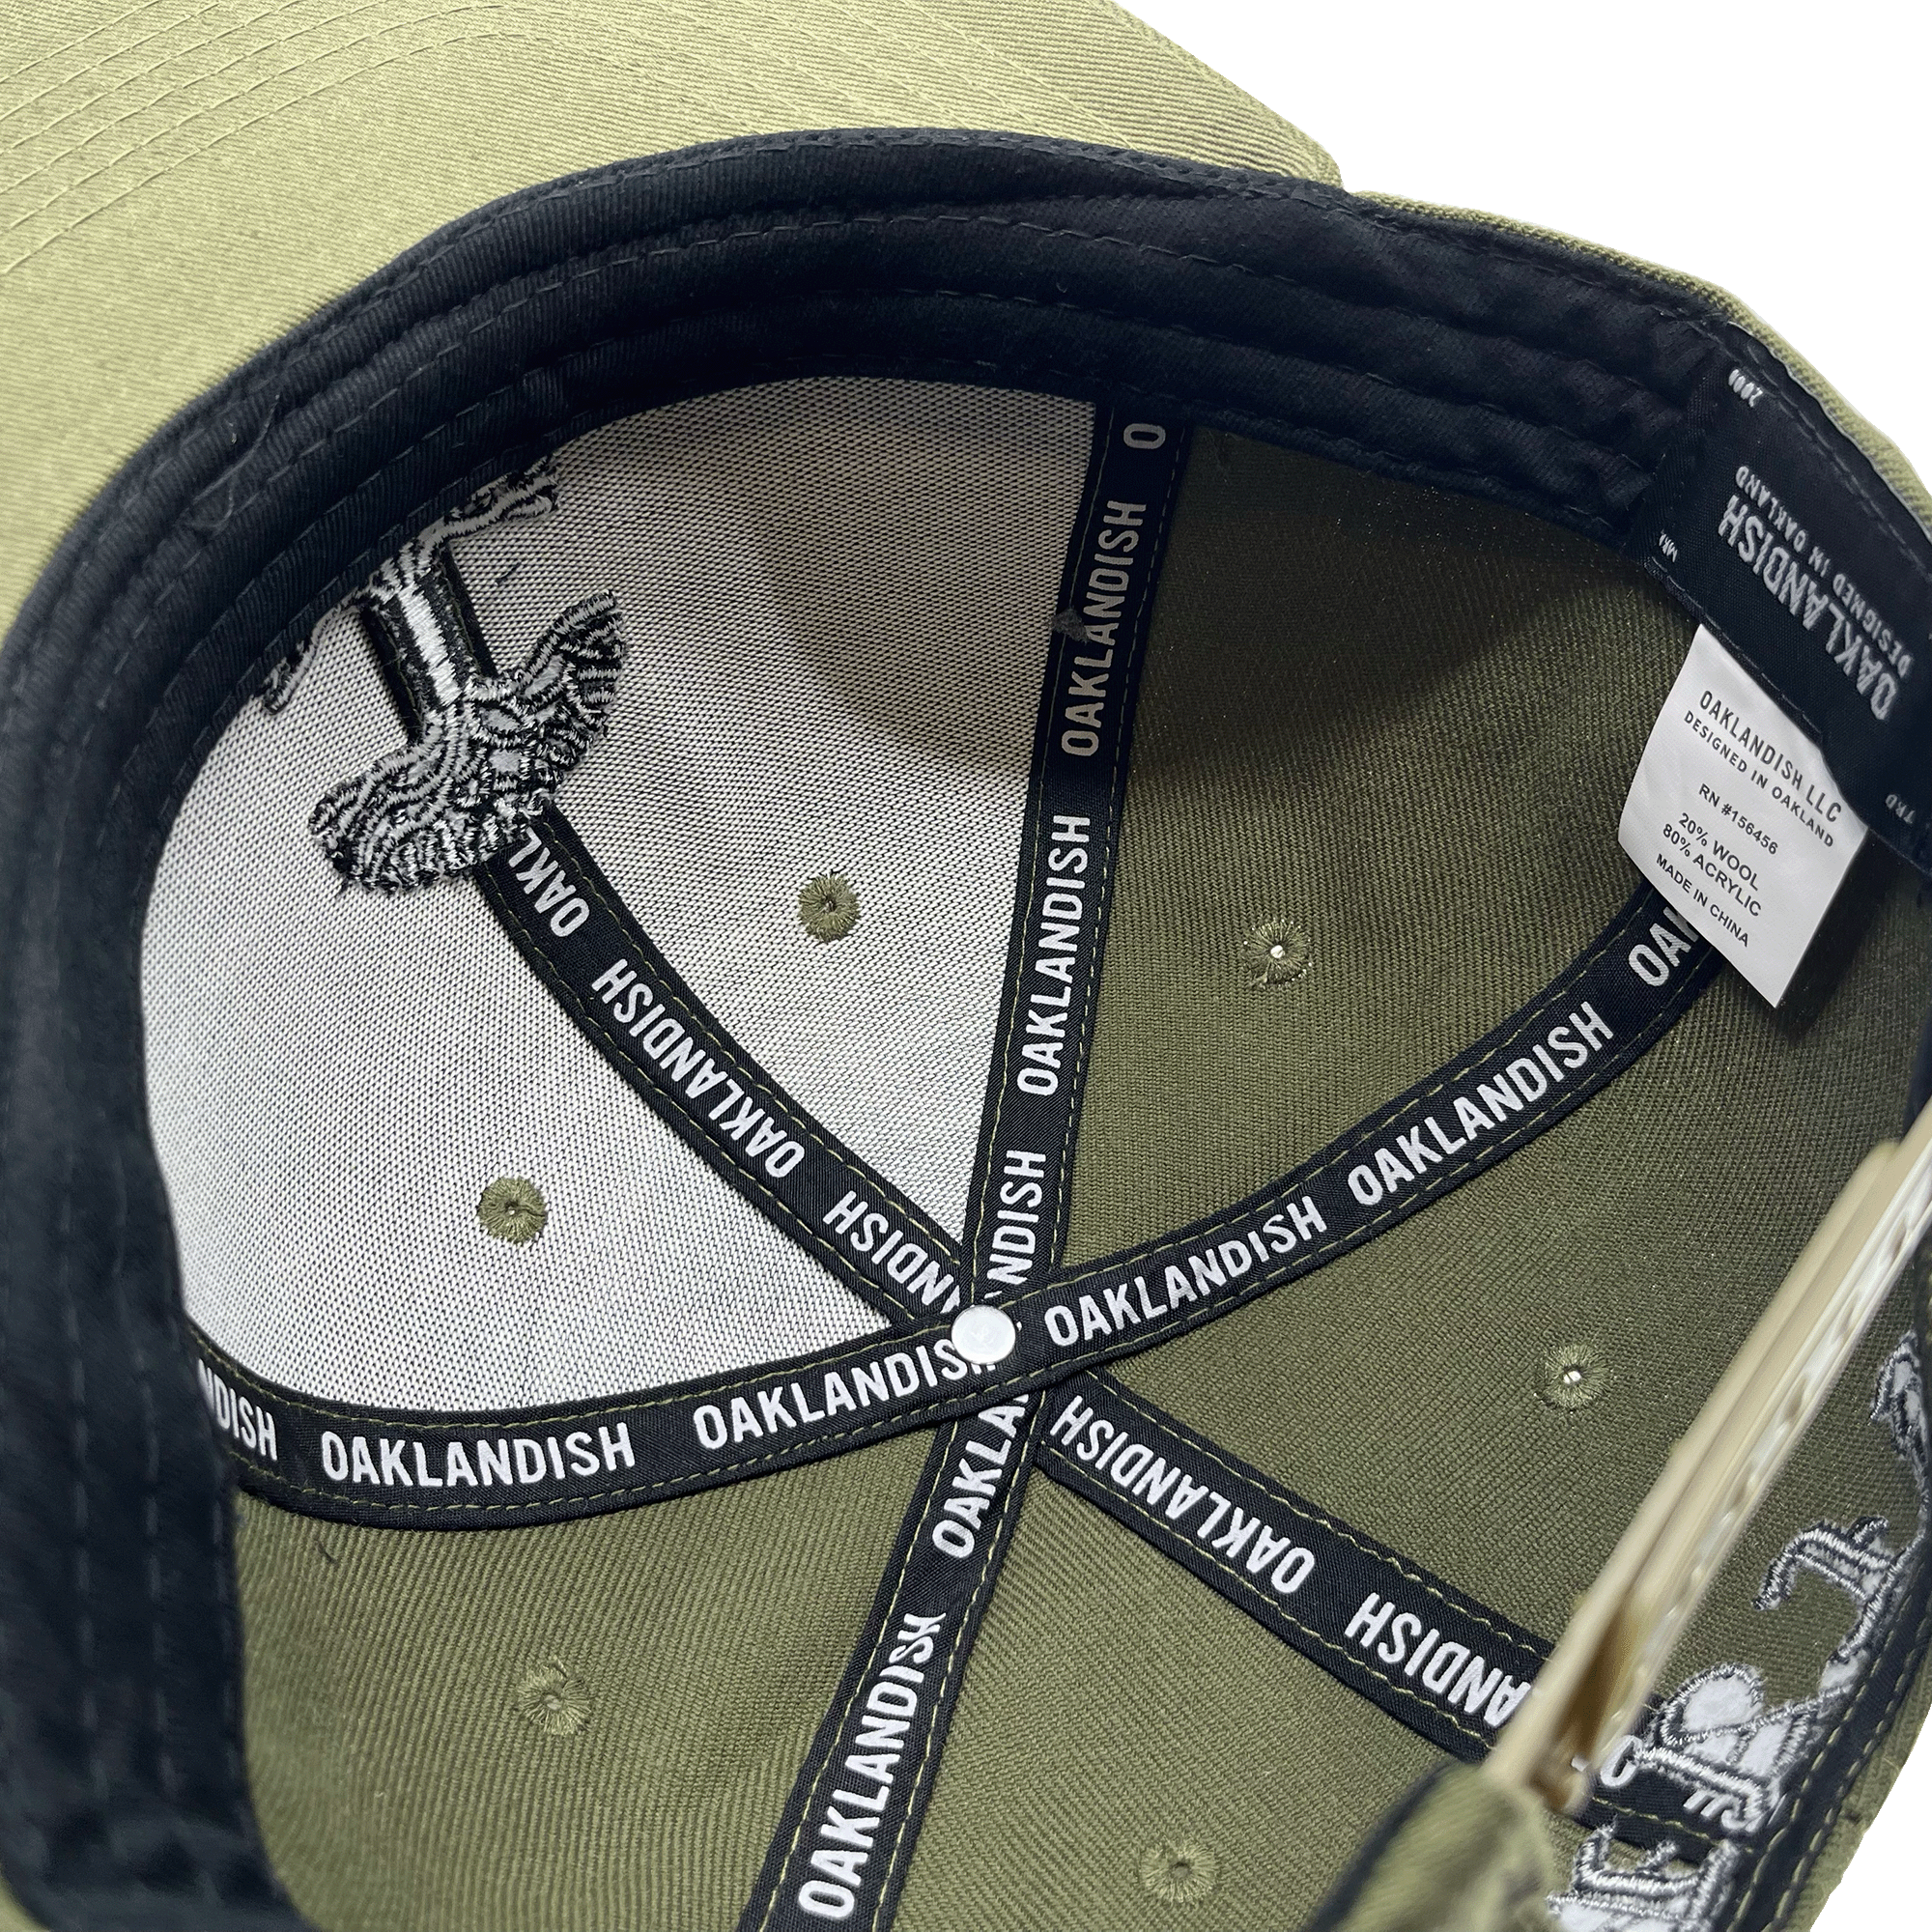 Inside under view of the black Oaklandish taping inside a gree Oaklandish hat. 